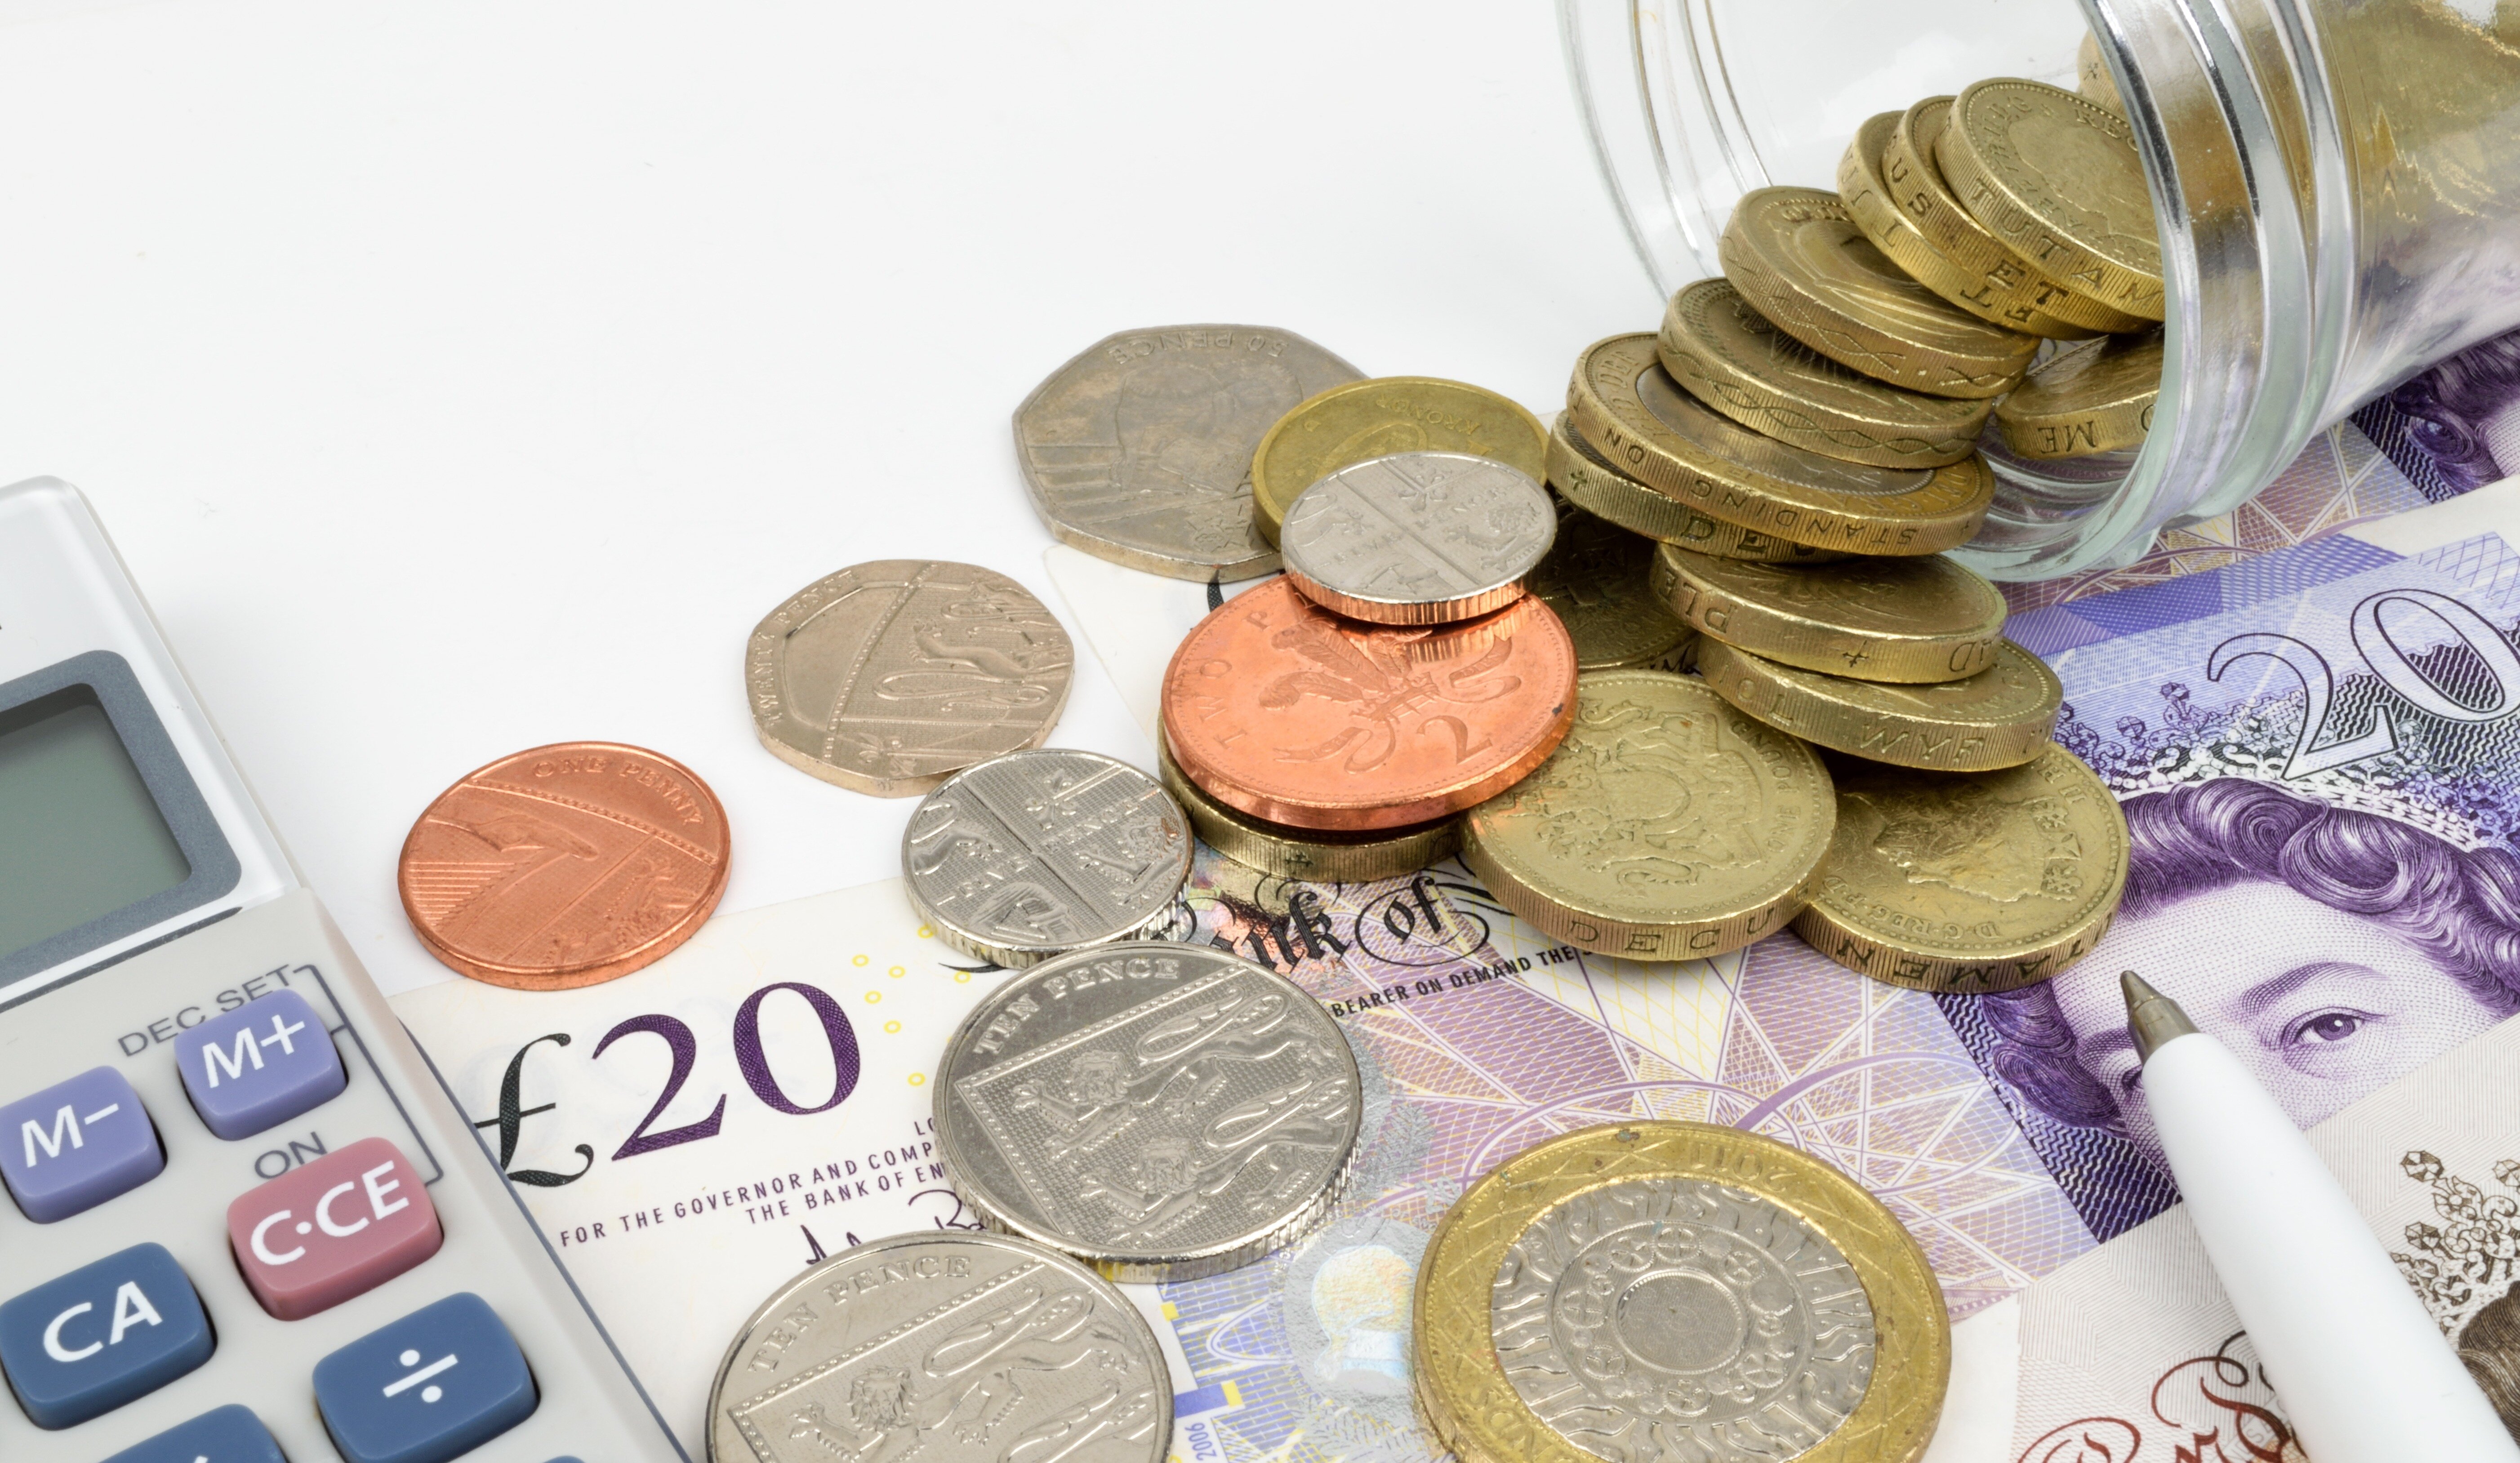 Two-thirds of councils fail to distribute business rates relief fund